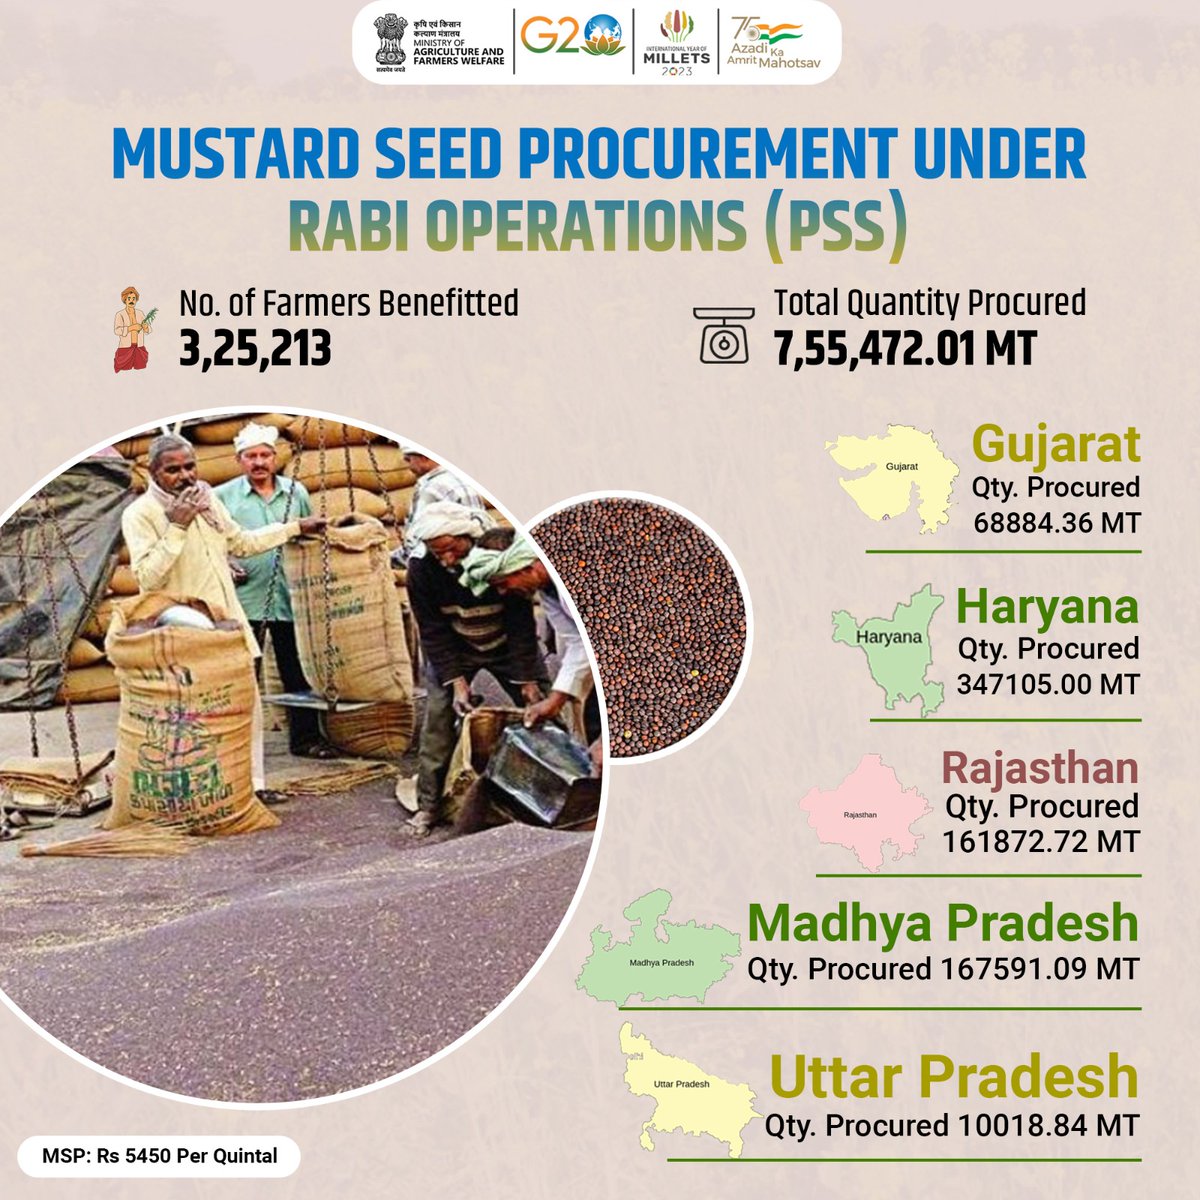 A quantity of 7.55 lakh metric tons (LMT) of #mustard seeds has been procured to date, benefiting more than 3.25 lakh farmers from Gujarat, Haryana, Rajasthan, Madhya Pradesh, and Uttar Pradesh. The #MSP for mustard seeds is Rs 5450 per quintal for Rabi Marketing Season 2022-23.